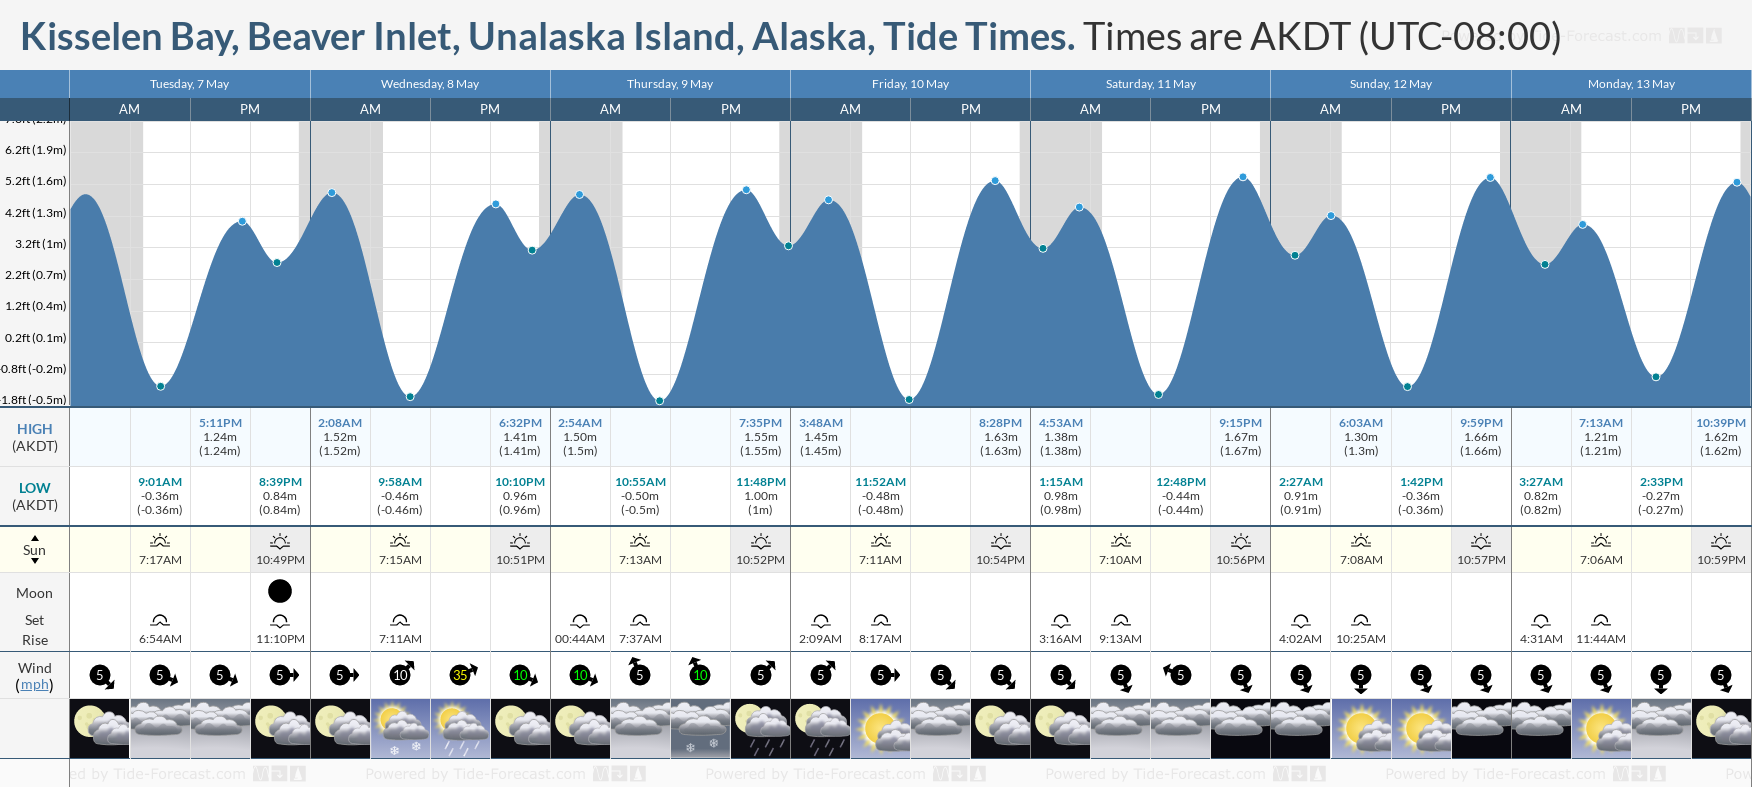 Kisselen Bay, Beaver Inlet, Unalaska Island, Alaska Tide Chart including high and low tide times for the next 7 days